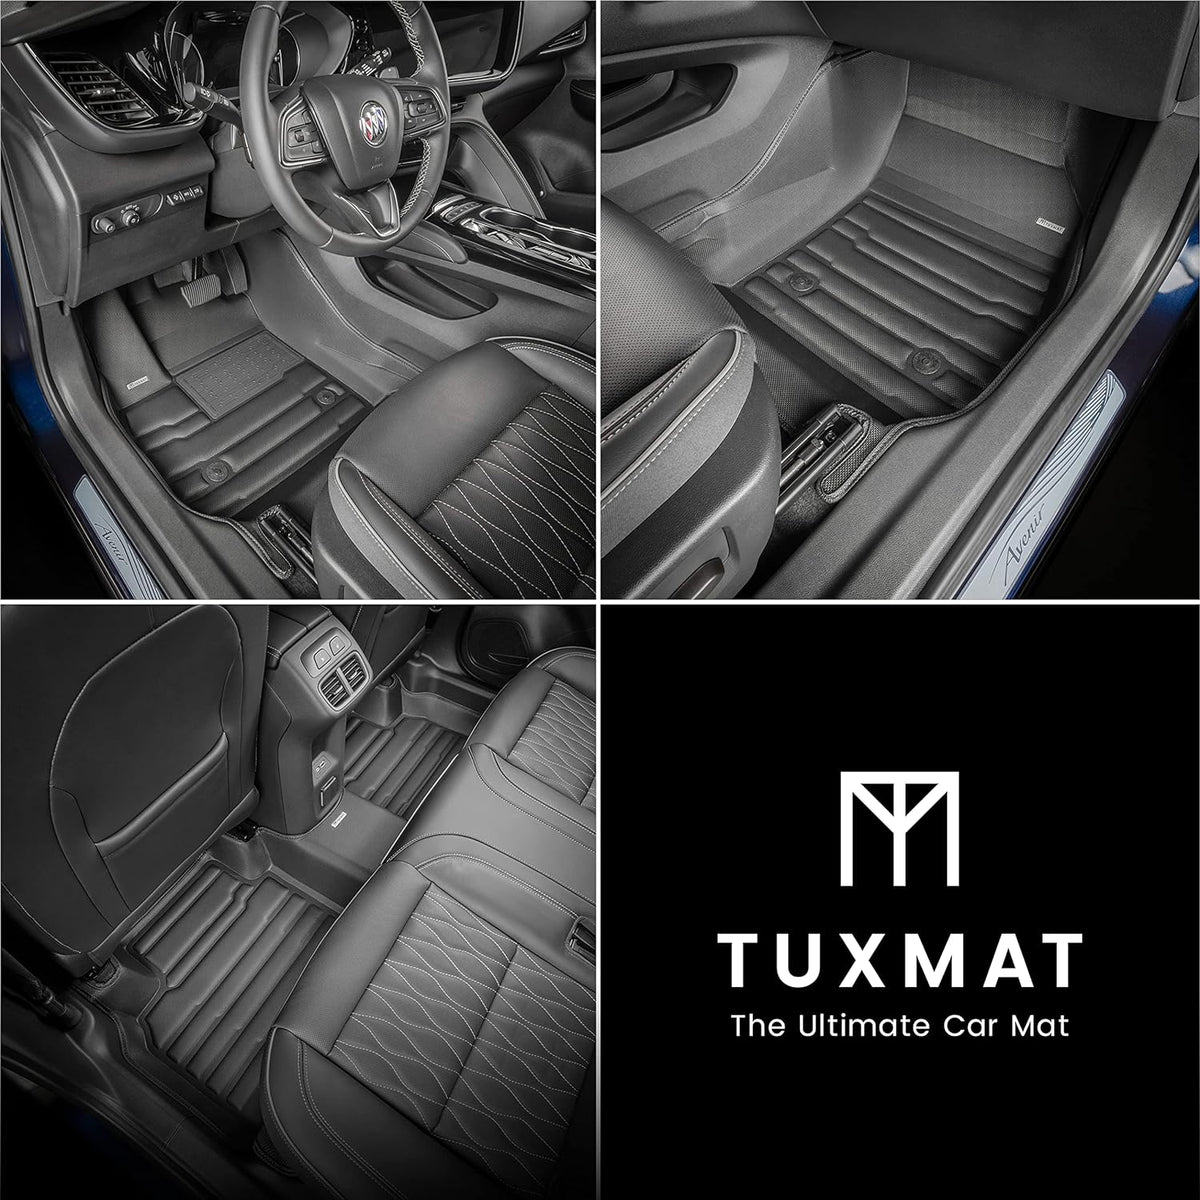 TuxMat - for Buick Envision 2021-2024 Models - Custom Car Mats - Maximum Coverage, All Weather, Laser Measured - This Full Set Includes 1st and 2nd Rows